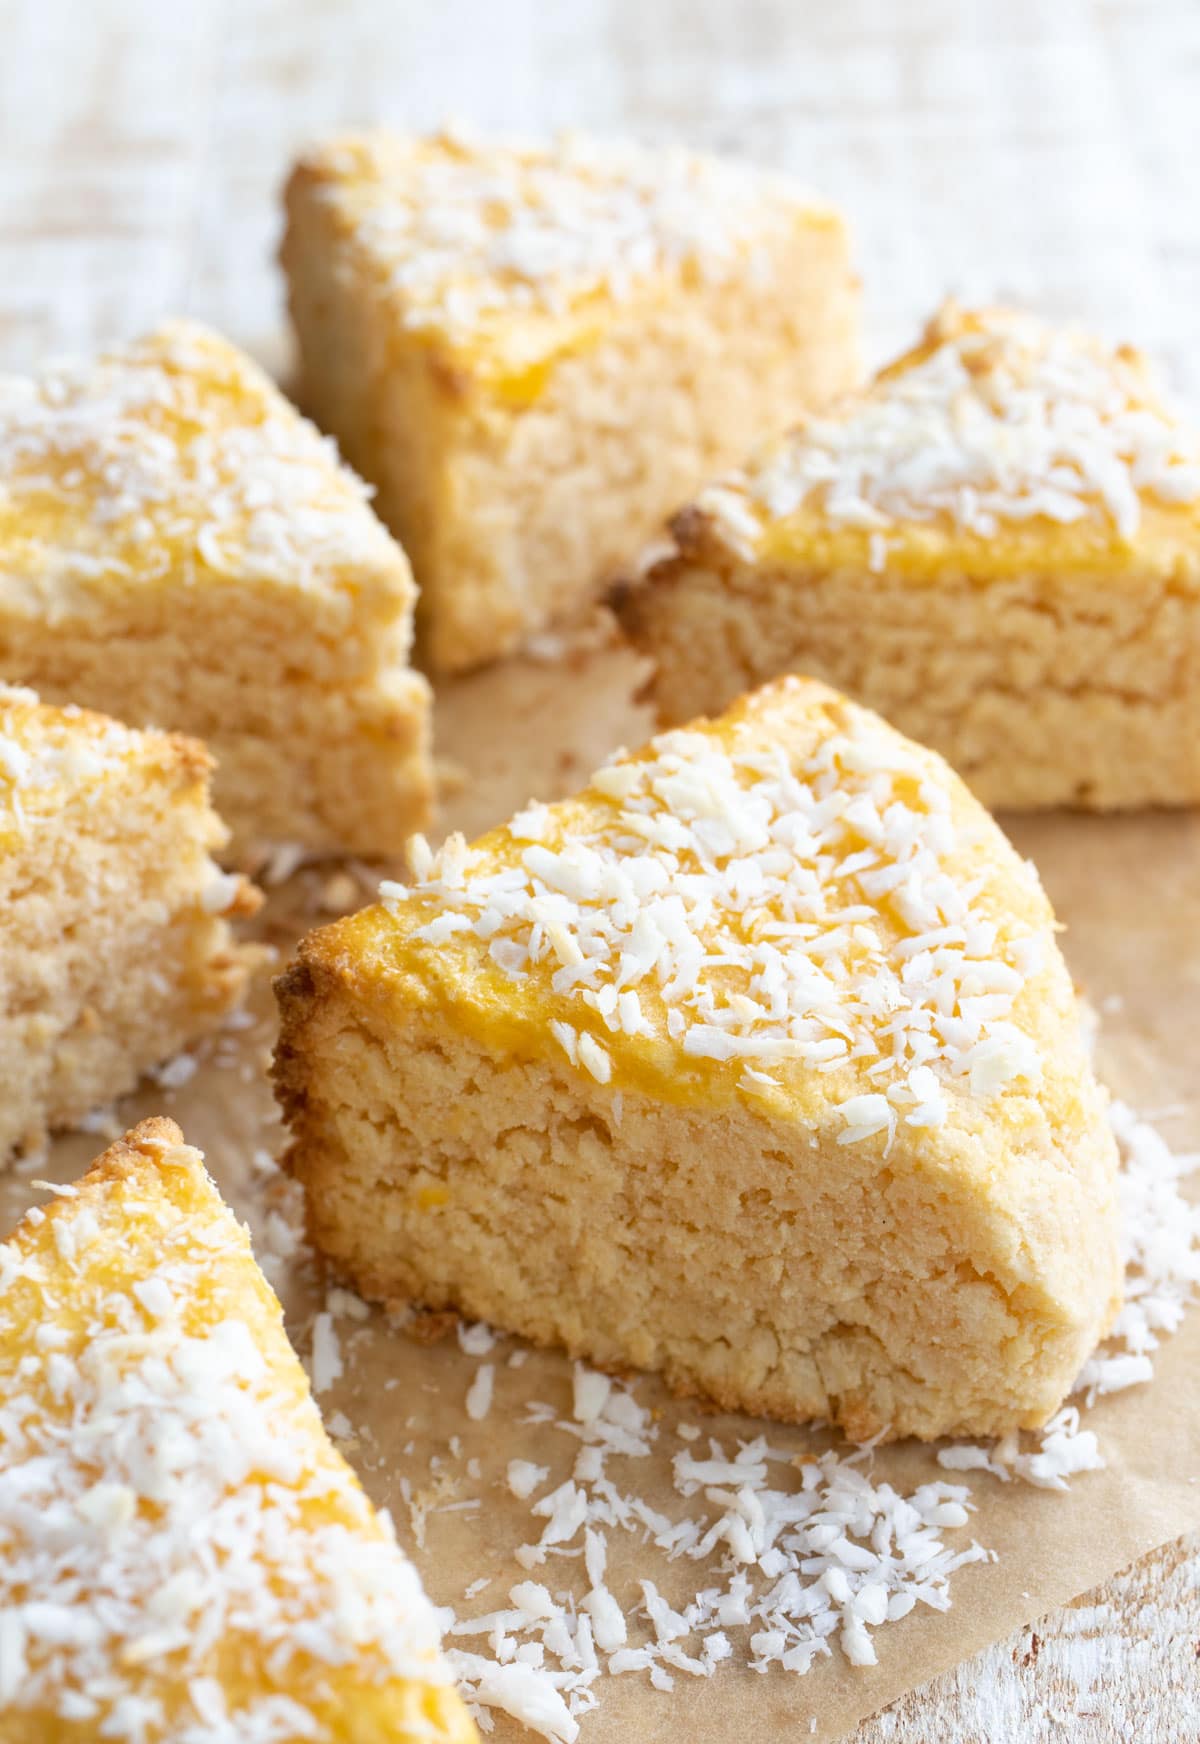 A triangular scones topped with desiccated coconut.